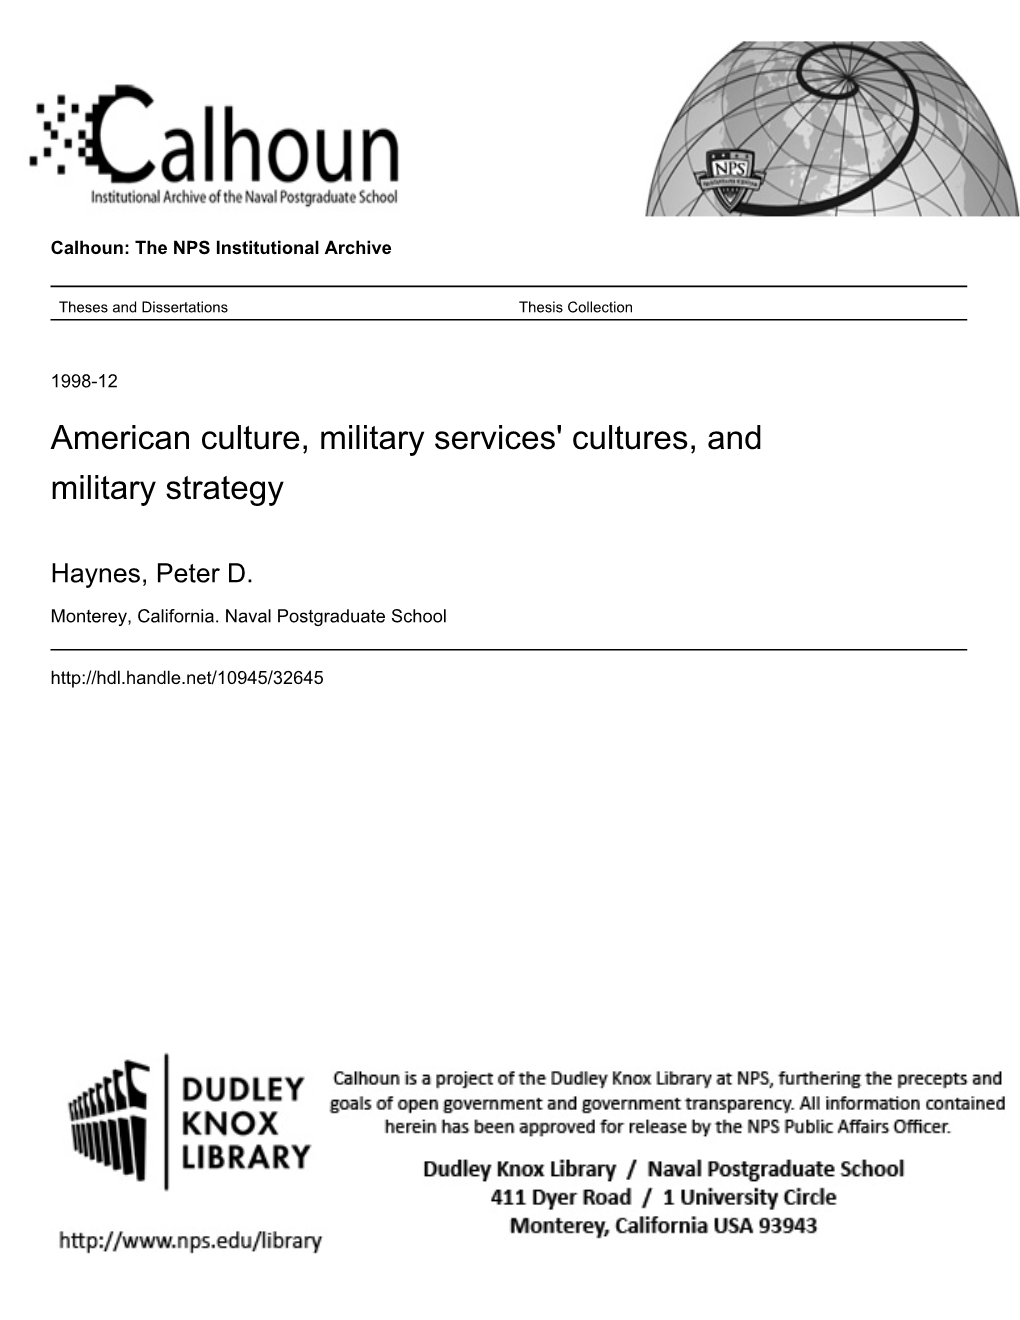 American Culture, Military Services' Cultures, and Military Strategy